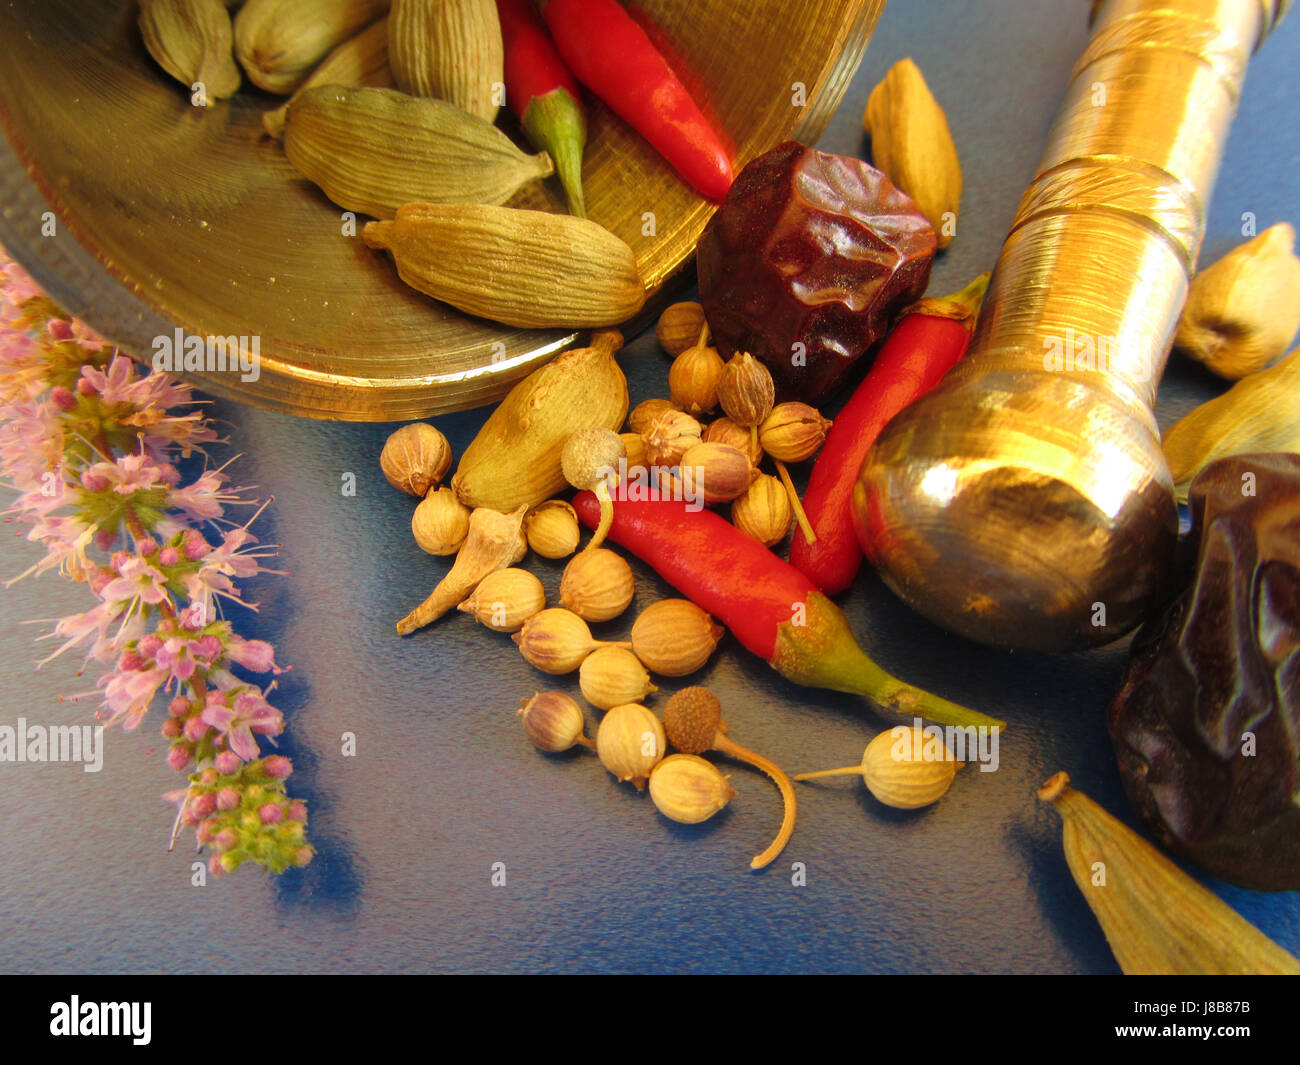 boil, cooks, boiling, cooking, red peppers, mortar, spices, bake, coriander, Stock Photo